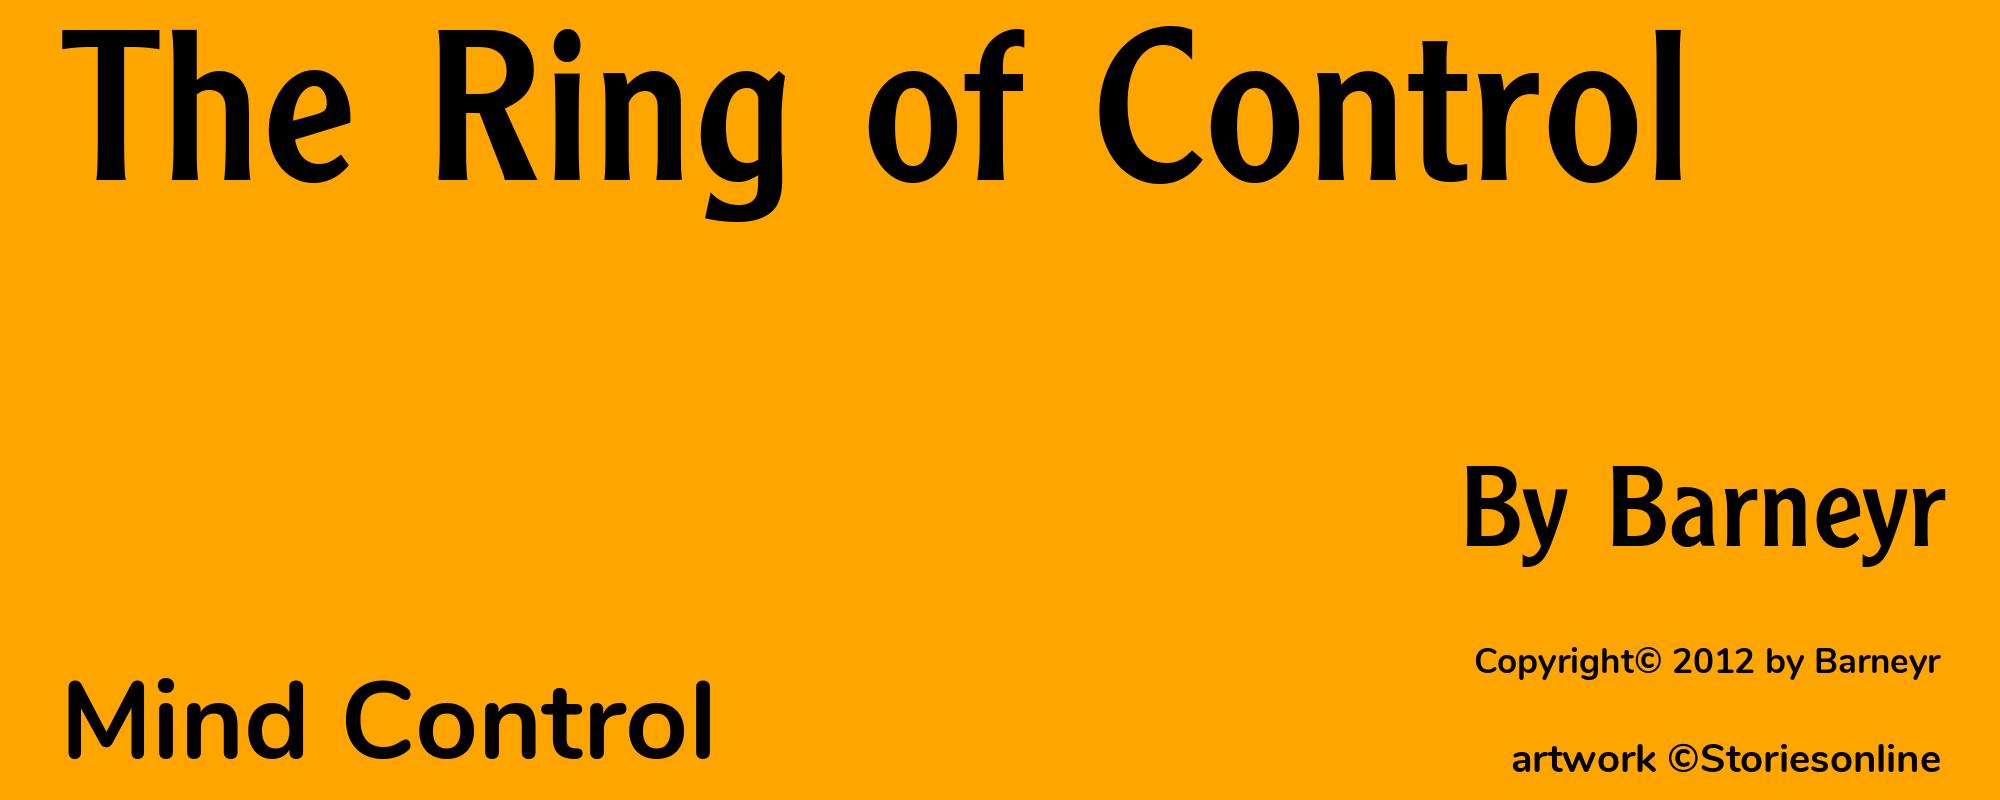 The Ring of Control - Cover